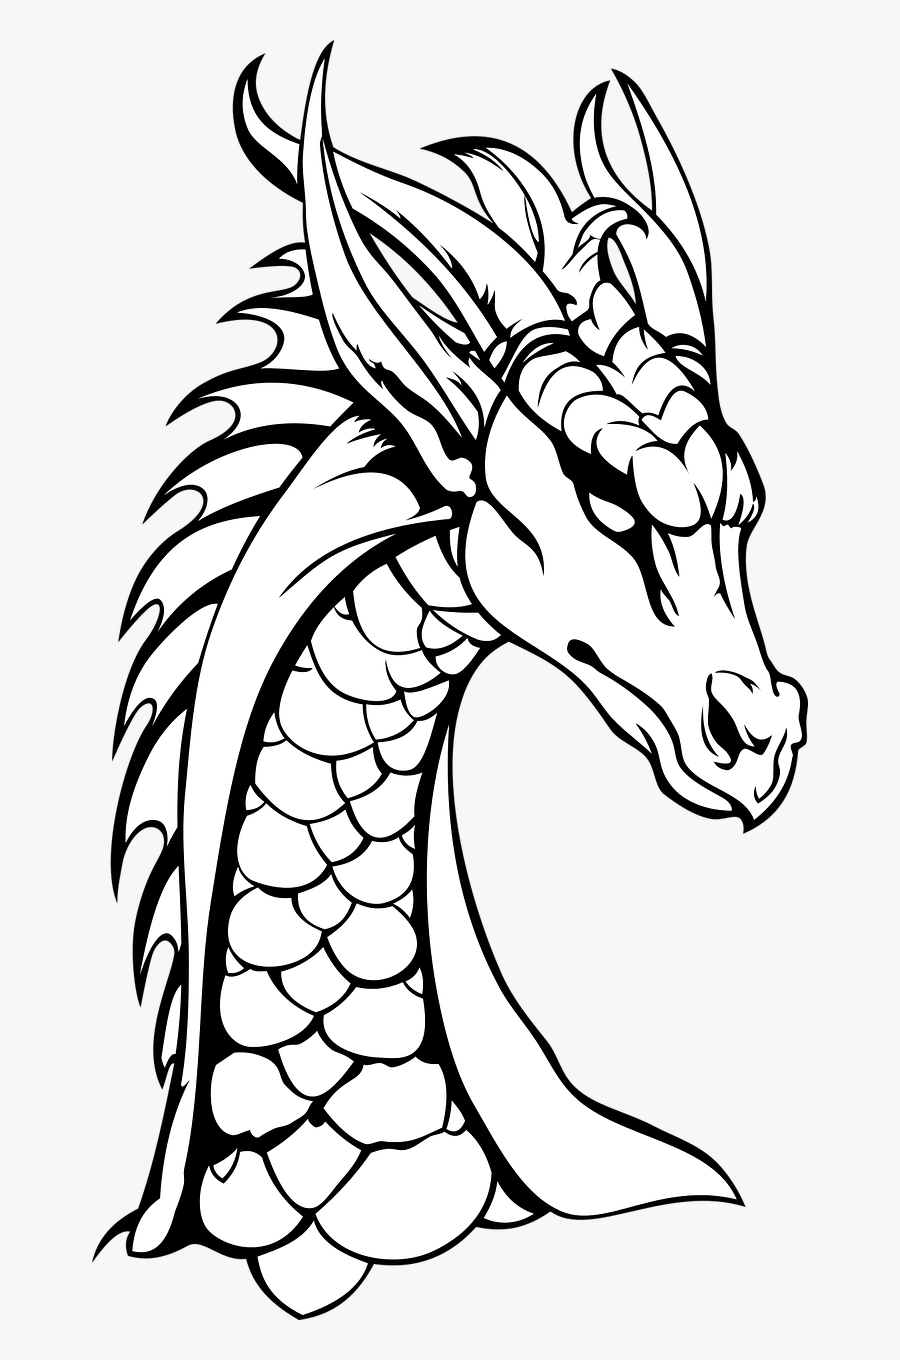 Dragon Neck The Head Of The Free Picture - Dragons Black And White, Transparent Clipart